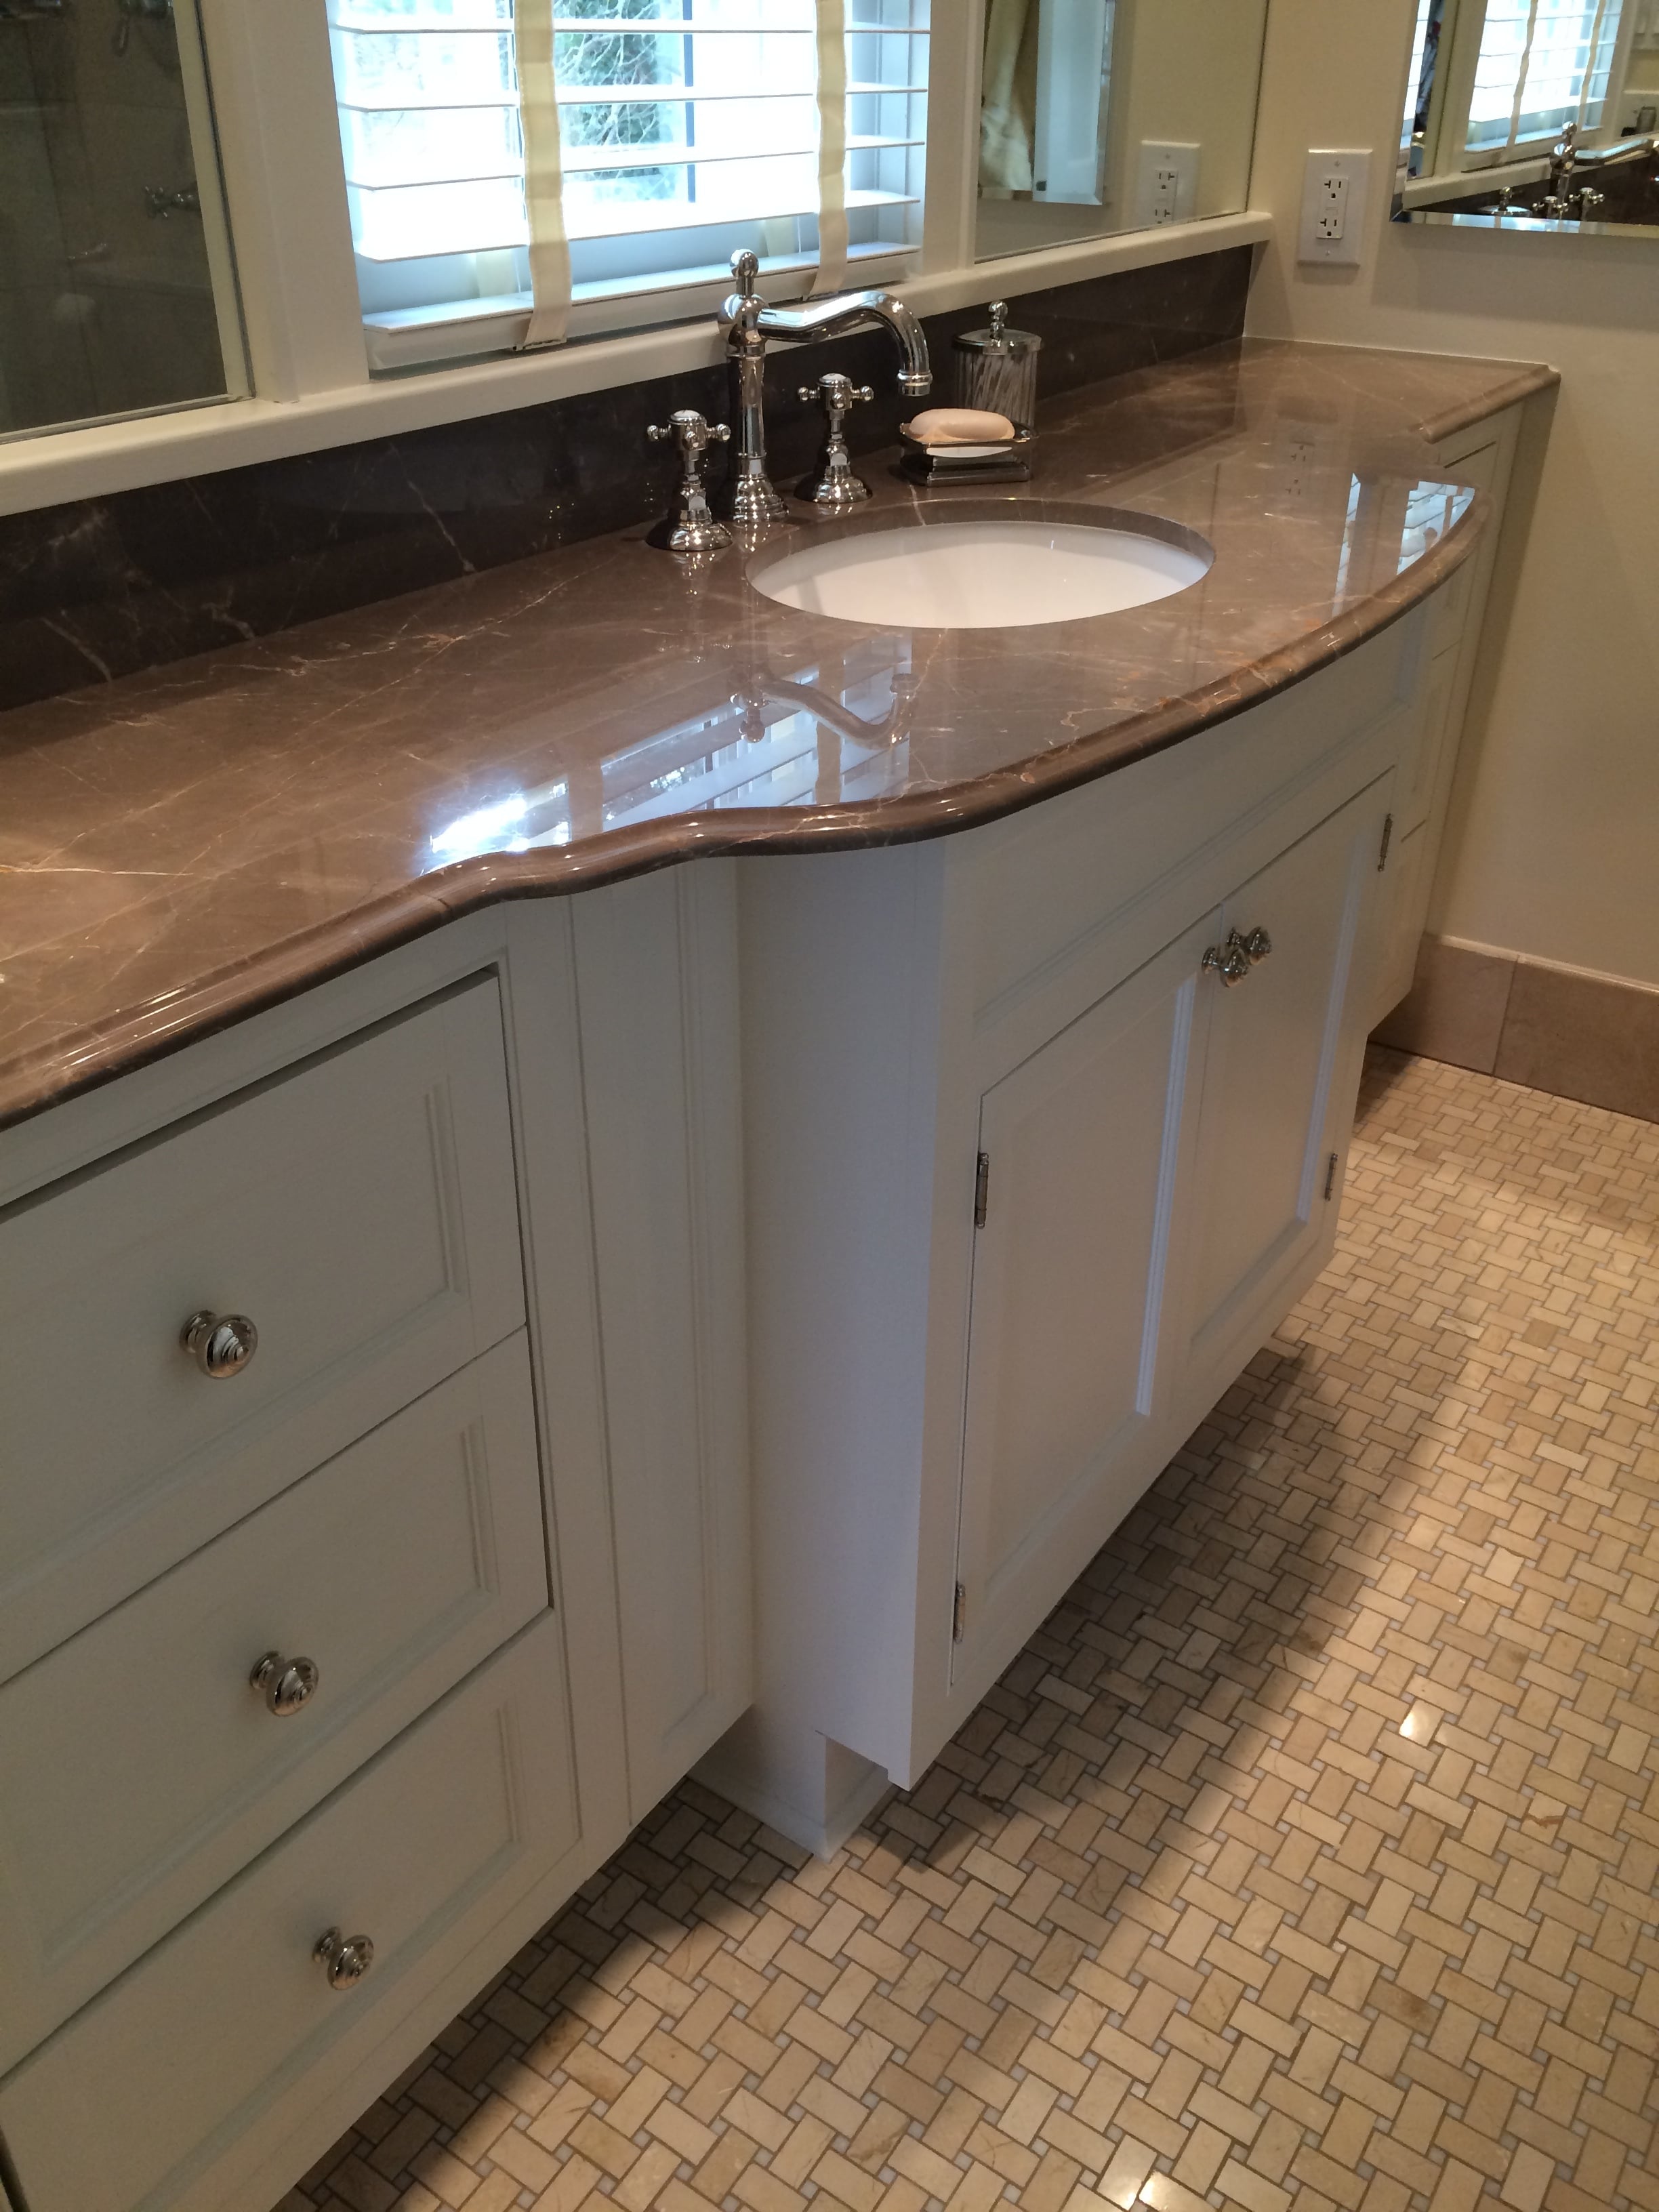 Custom designed vanity for an old home with a small master bath to maximize space and storage while creating an elegant feel.